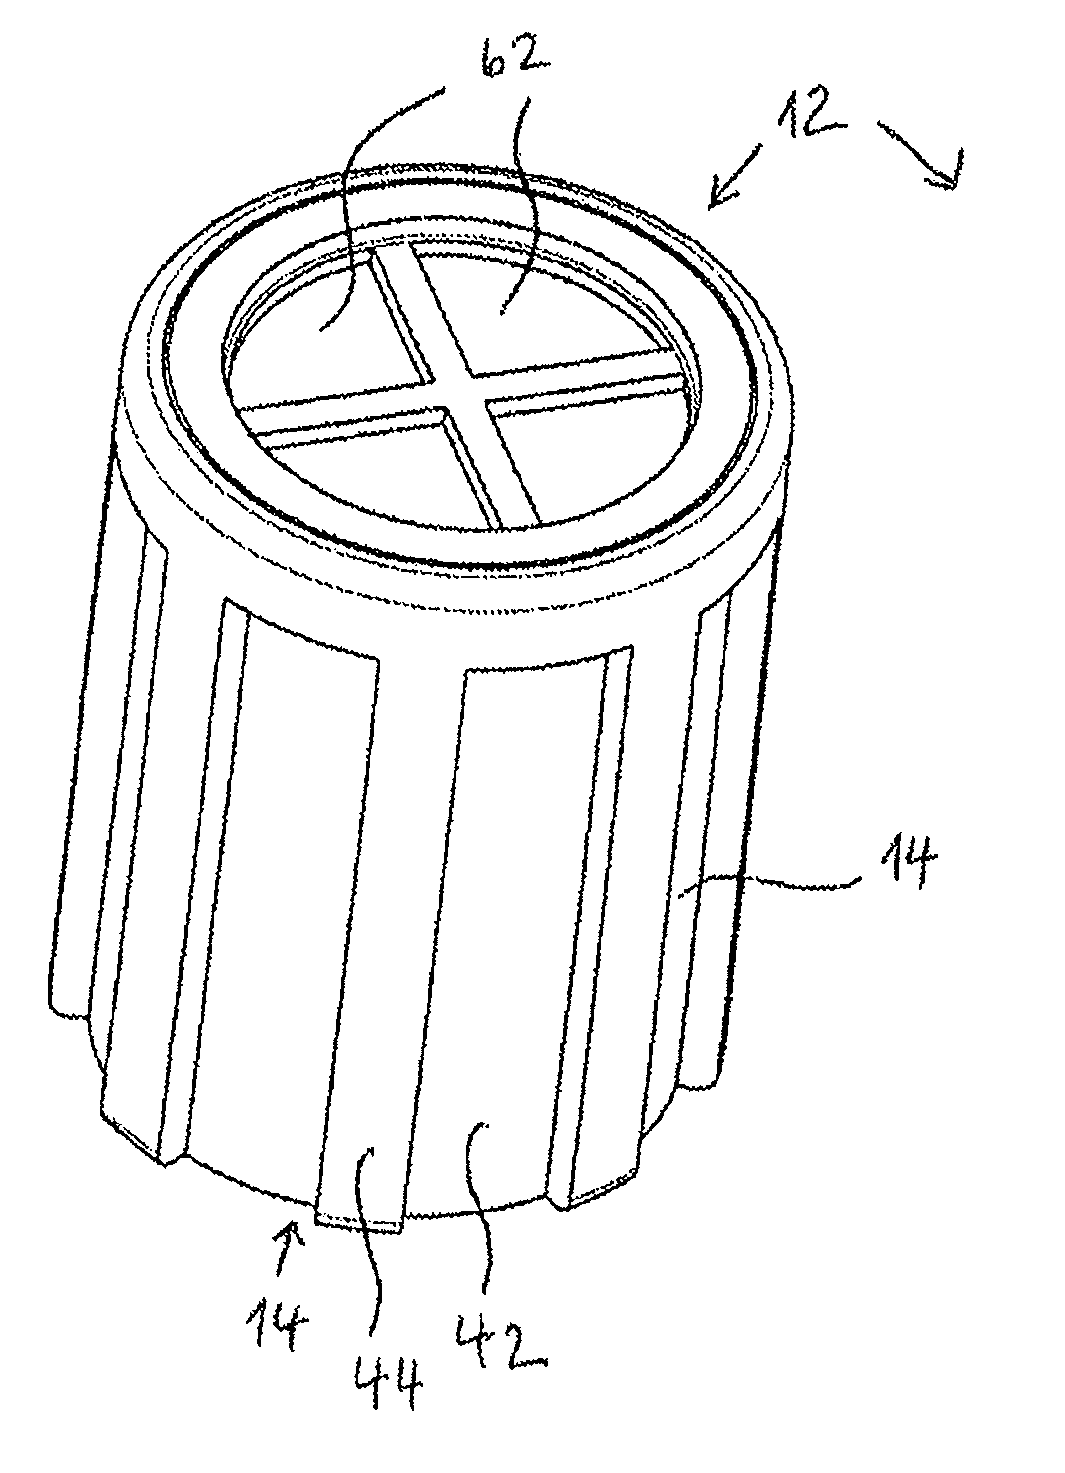 Canister for containing an active material